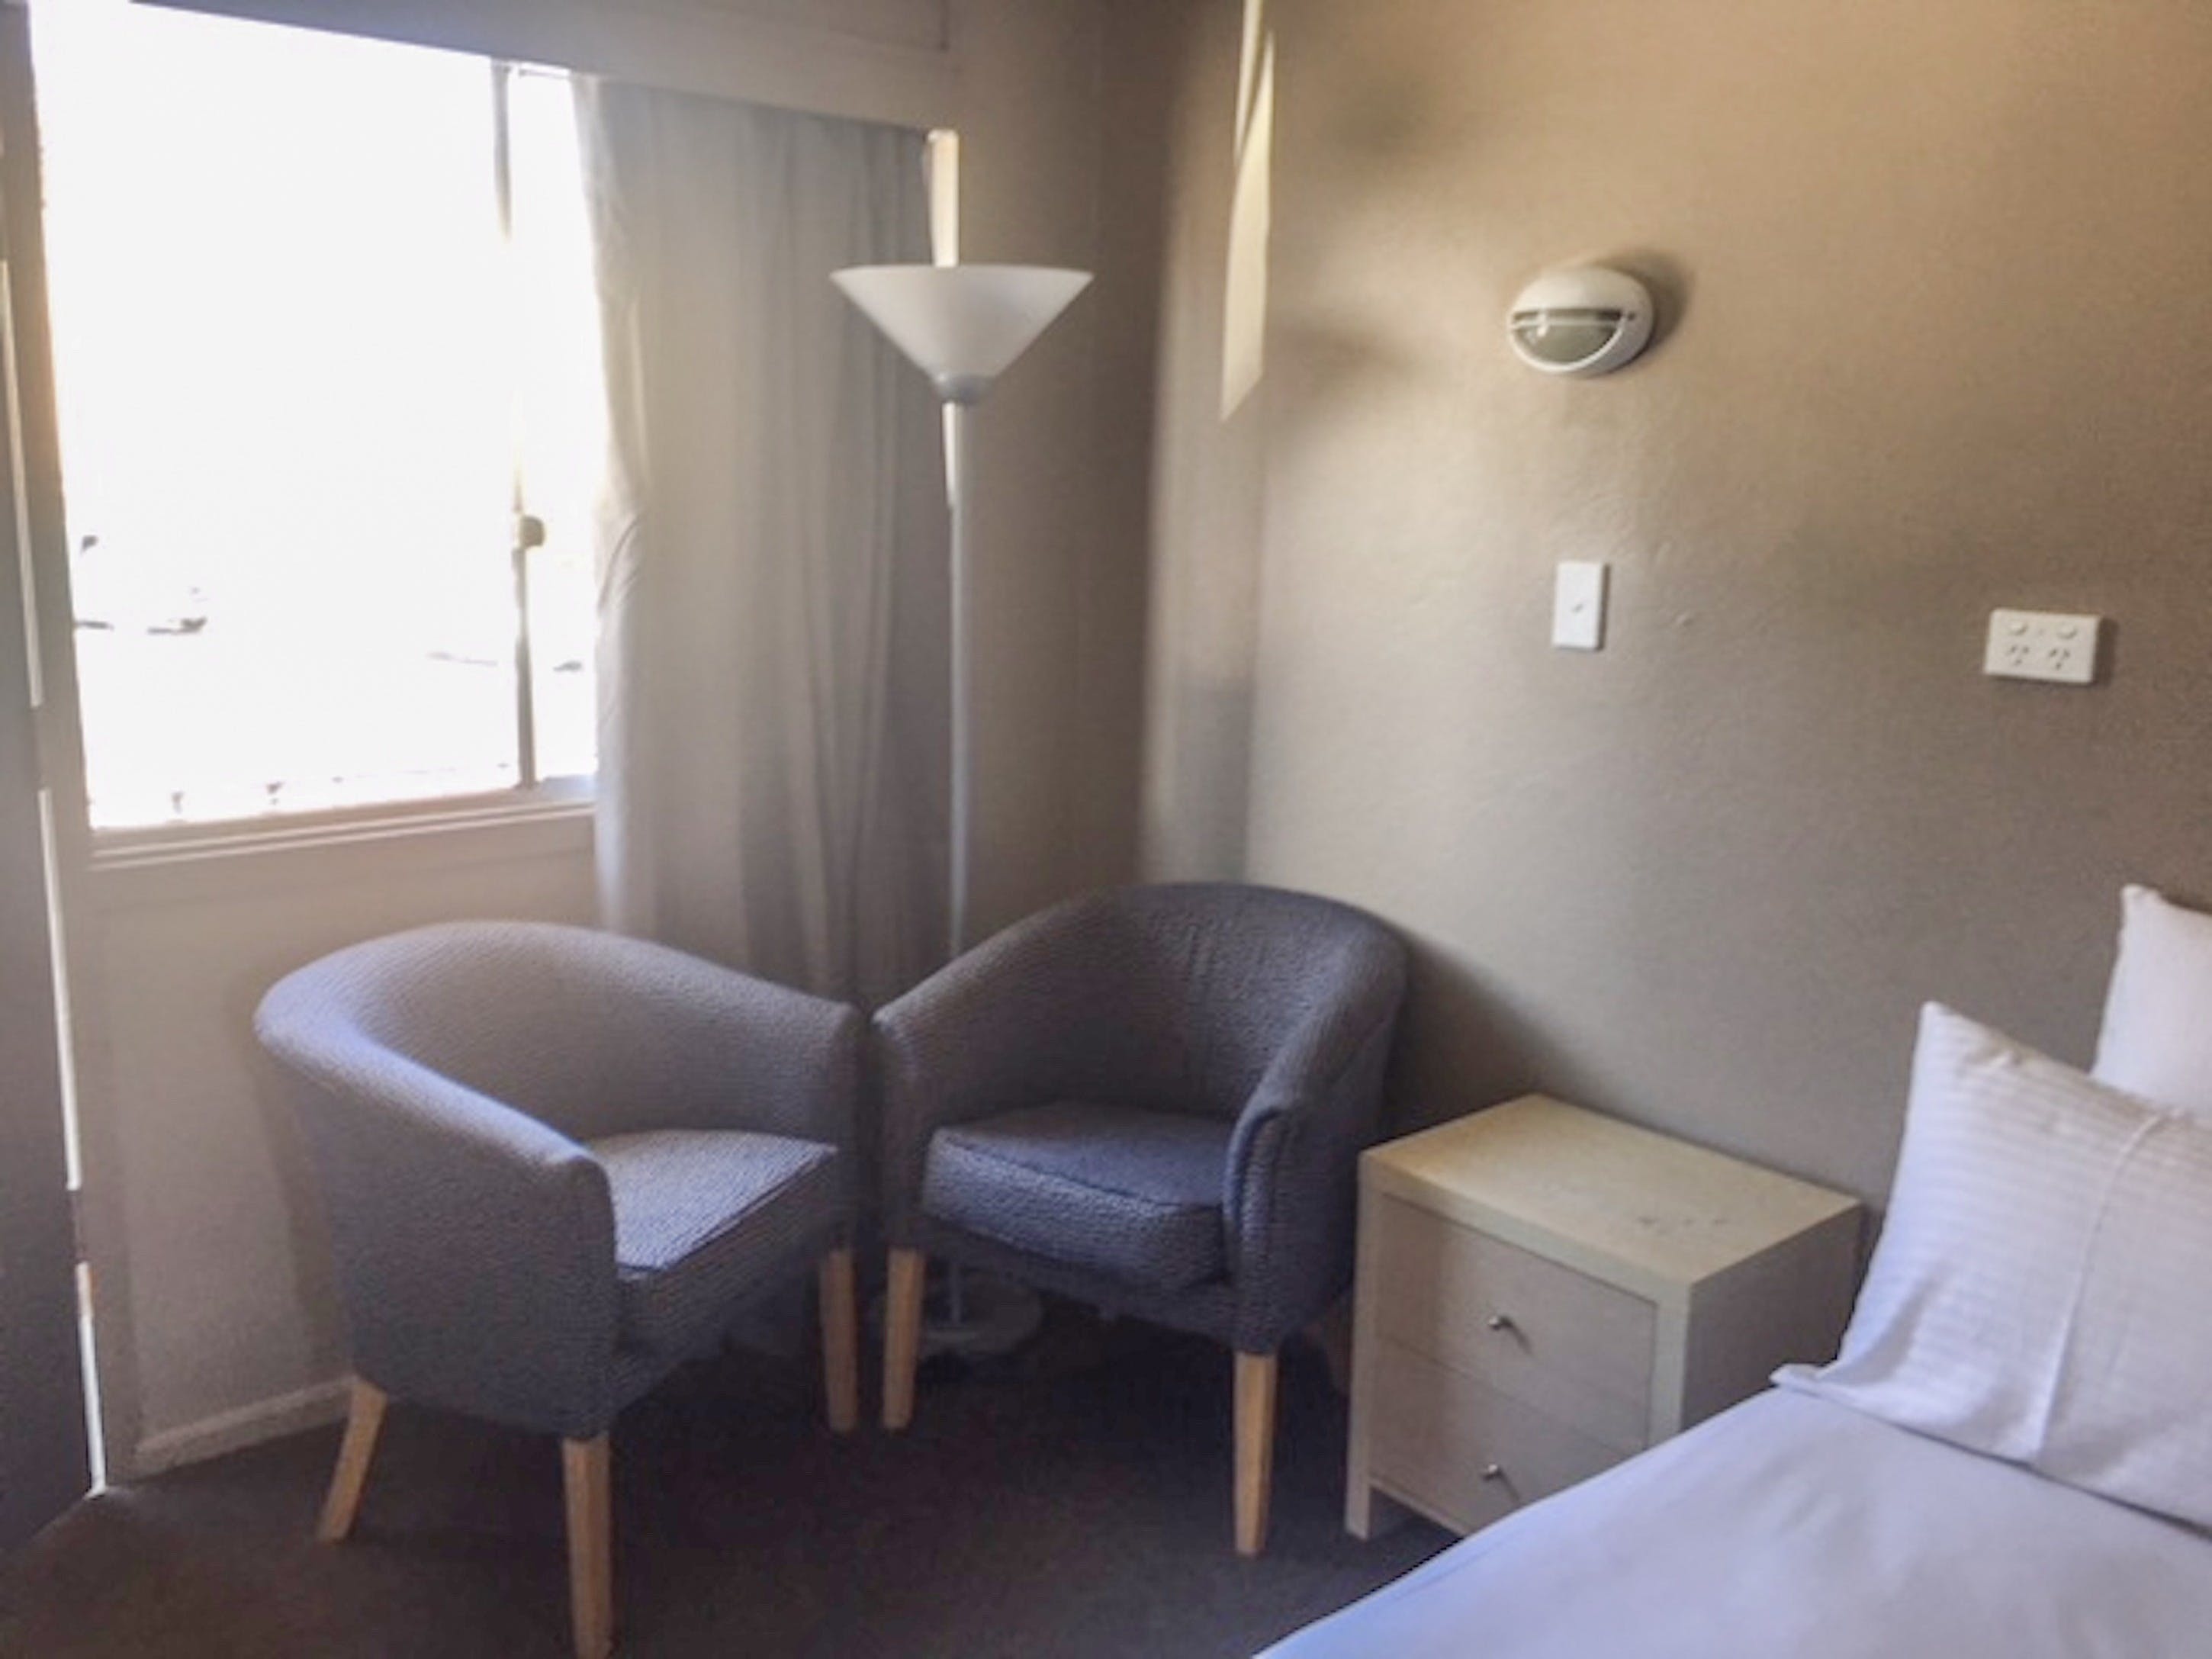 Commercial Hotel Motel Lithgow - Kempsey Accommodation